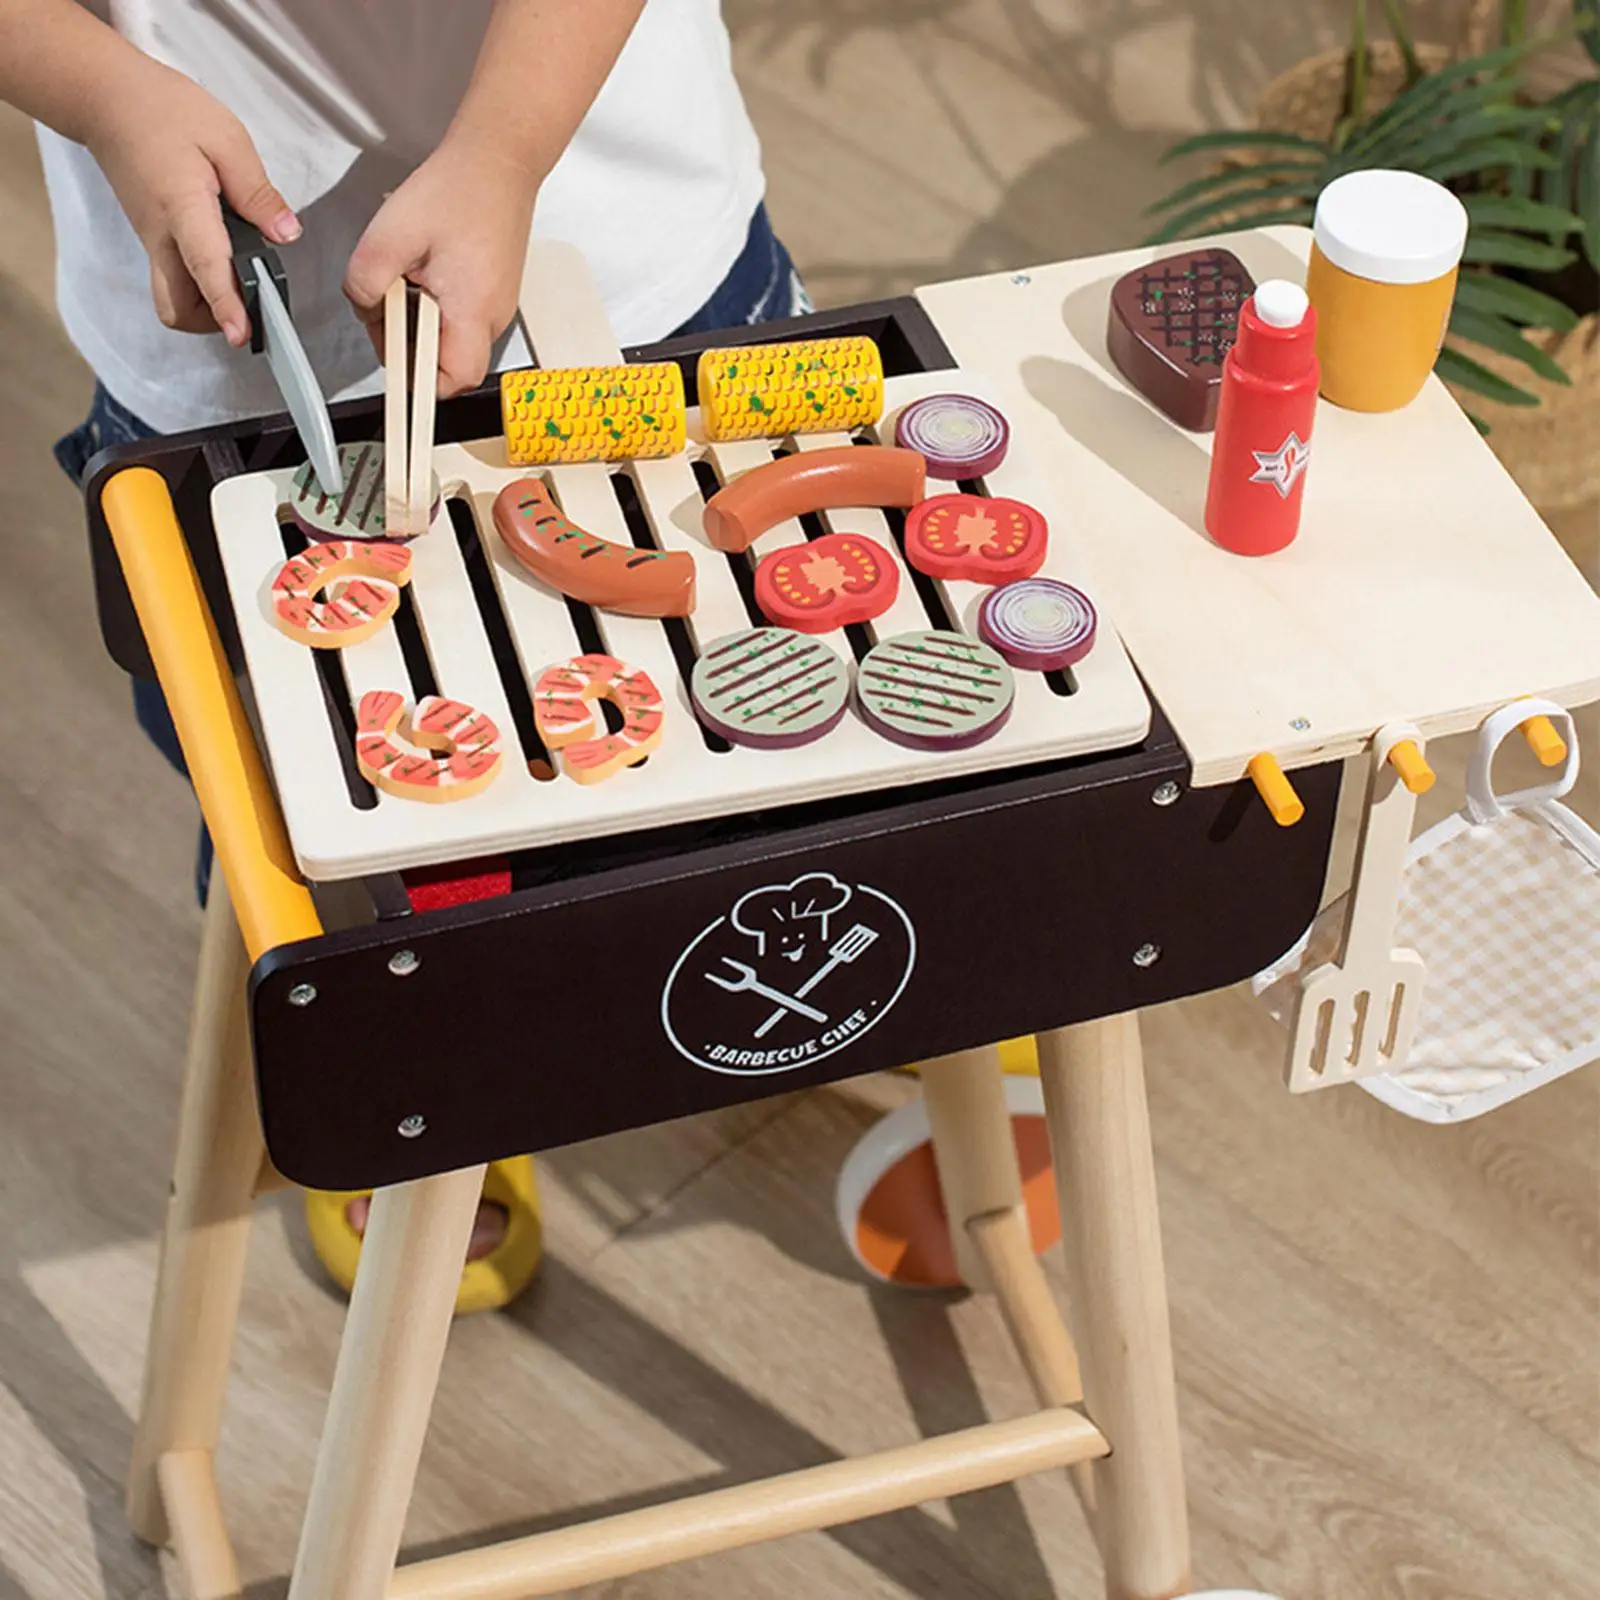 Realistic Kitchen BBQ Playset Learning Educational Toy Barbecue Grill Play Role Game Cooking Playset for Children Girls Kids